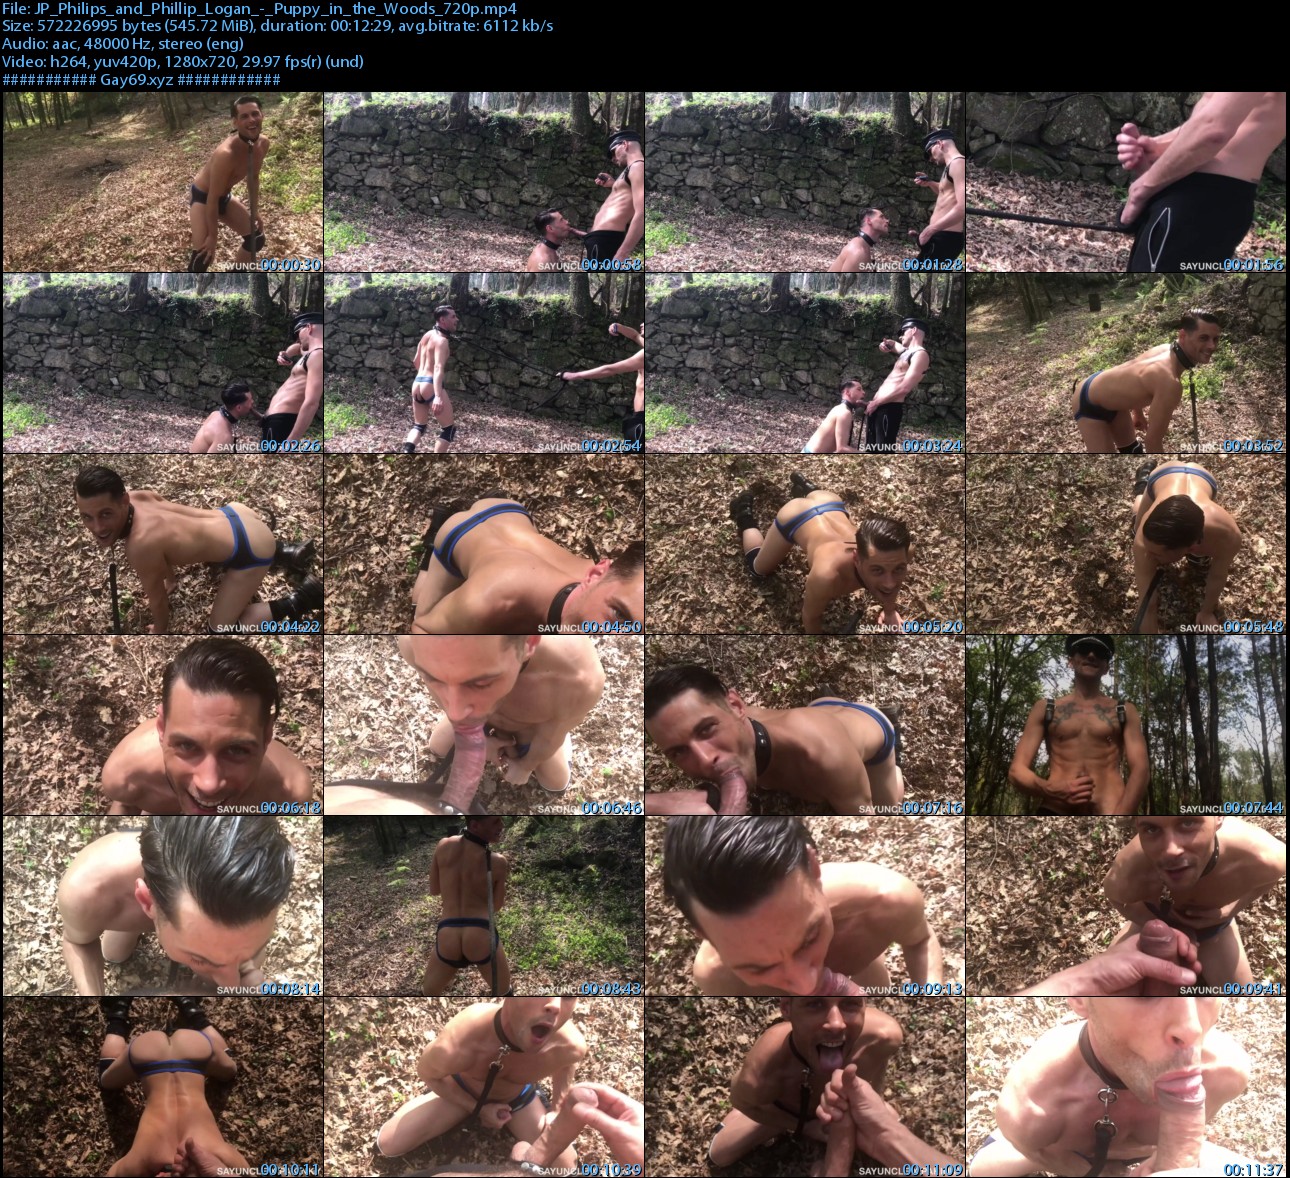 JP_Philips_and_Phillip_Logan_-_Puppy_in_the_Woods_720p_s.jpg